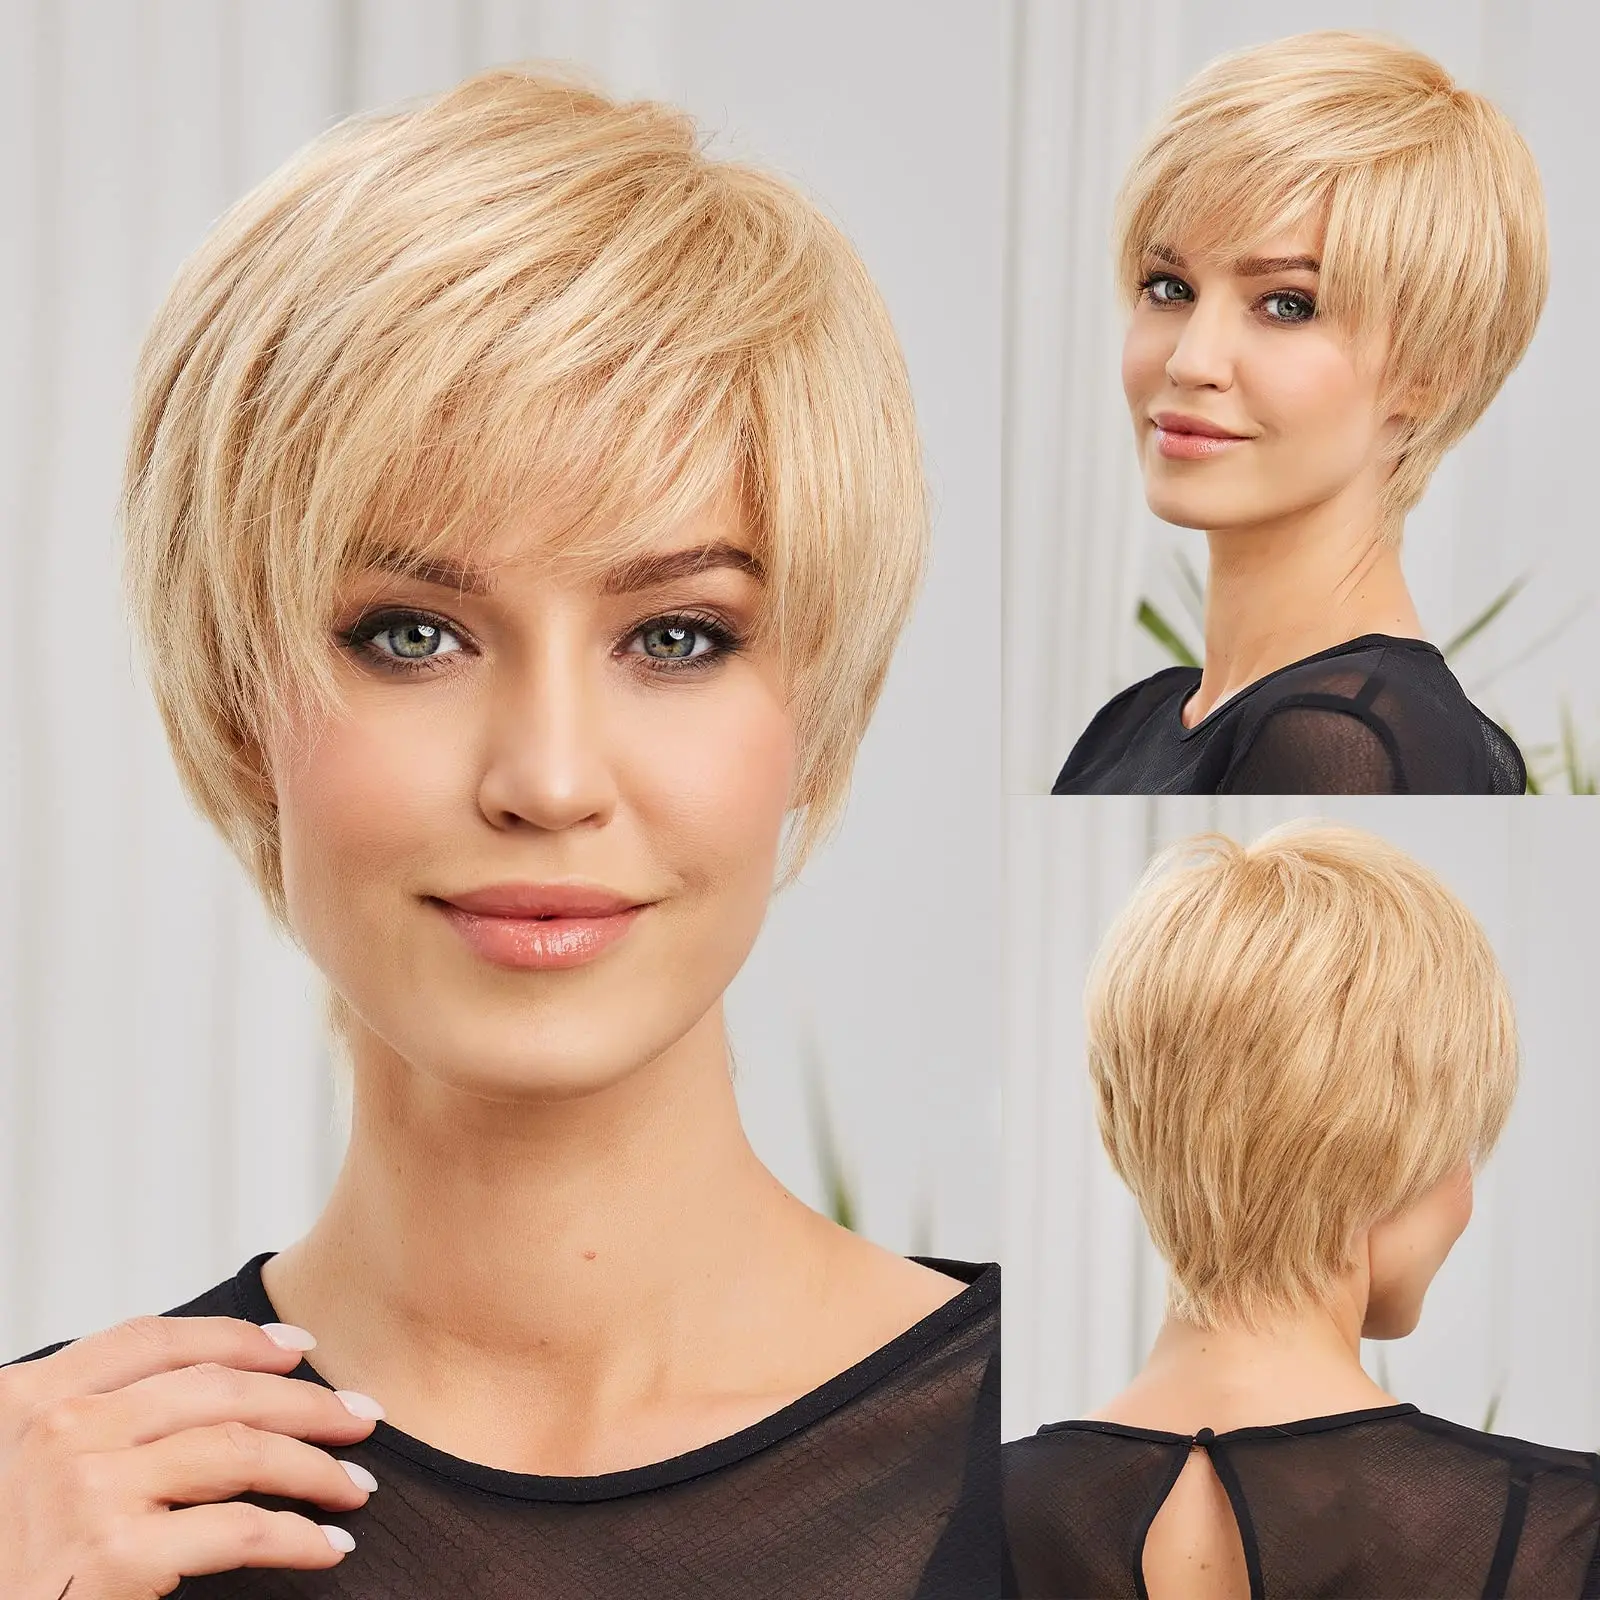 

Remy Short Pixie Cut Human Hair Wig Bob Honey Blonde Natural Straight Layered Wig with Bangs Human Hairs Glueless Wigs for Women